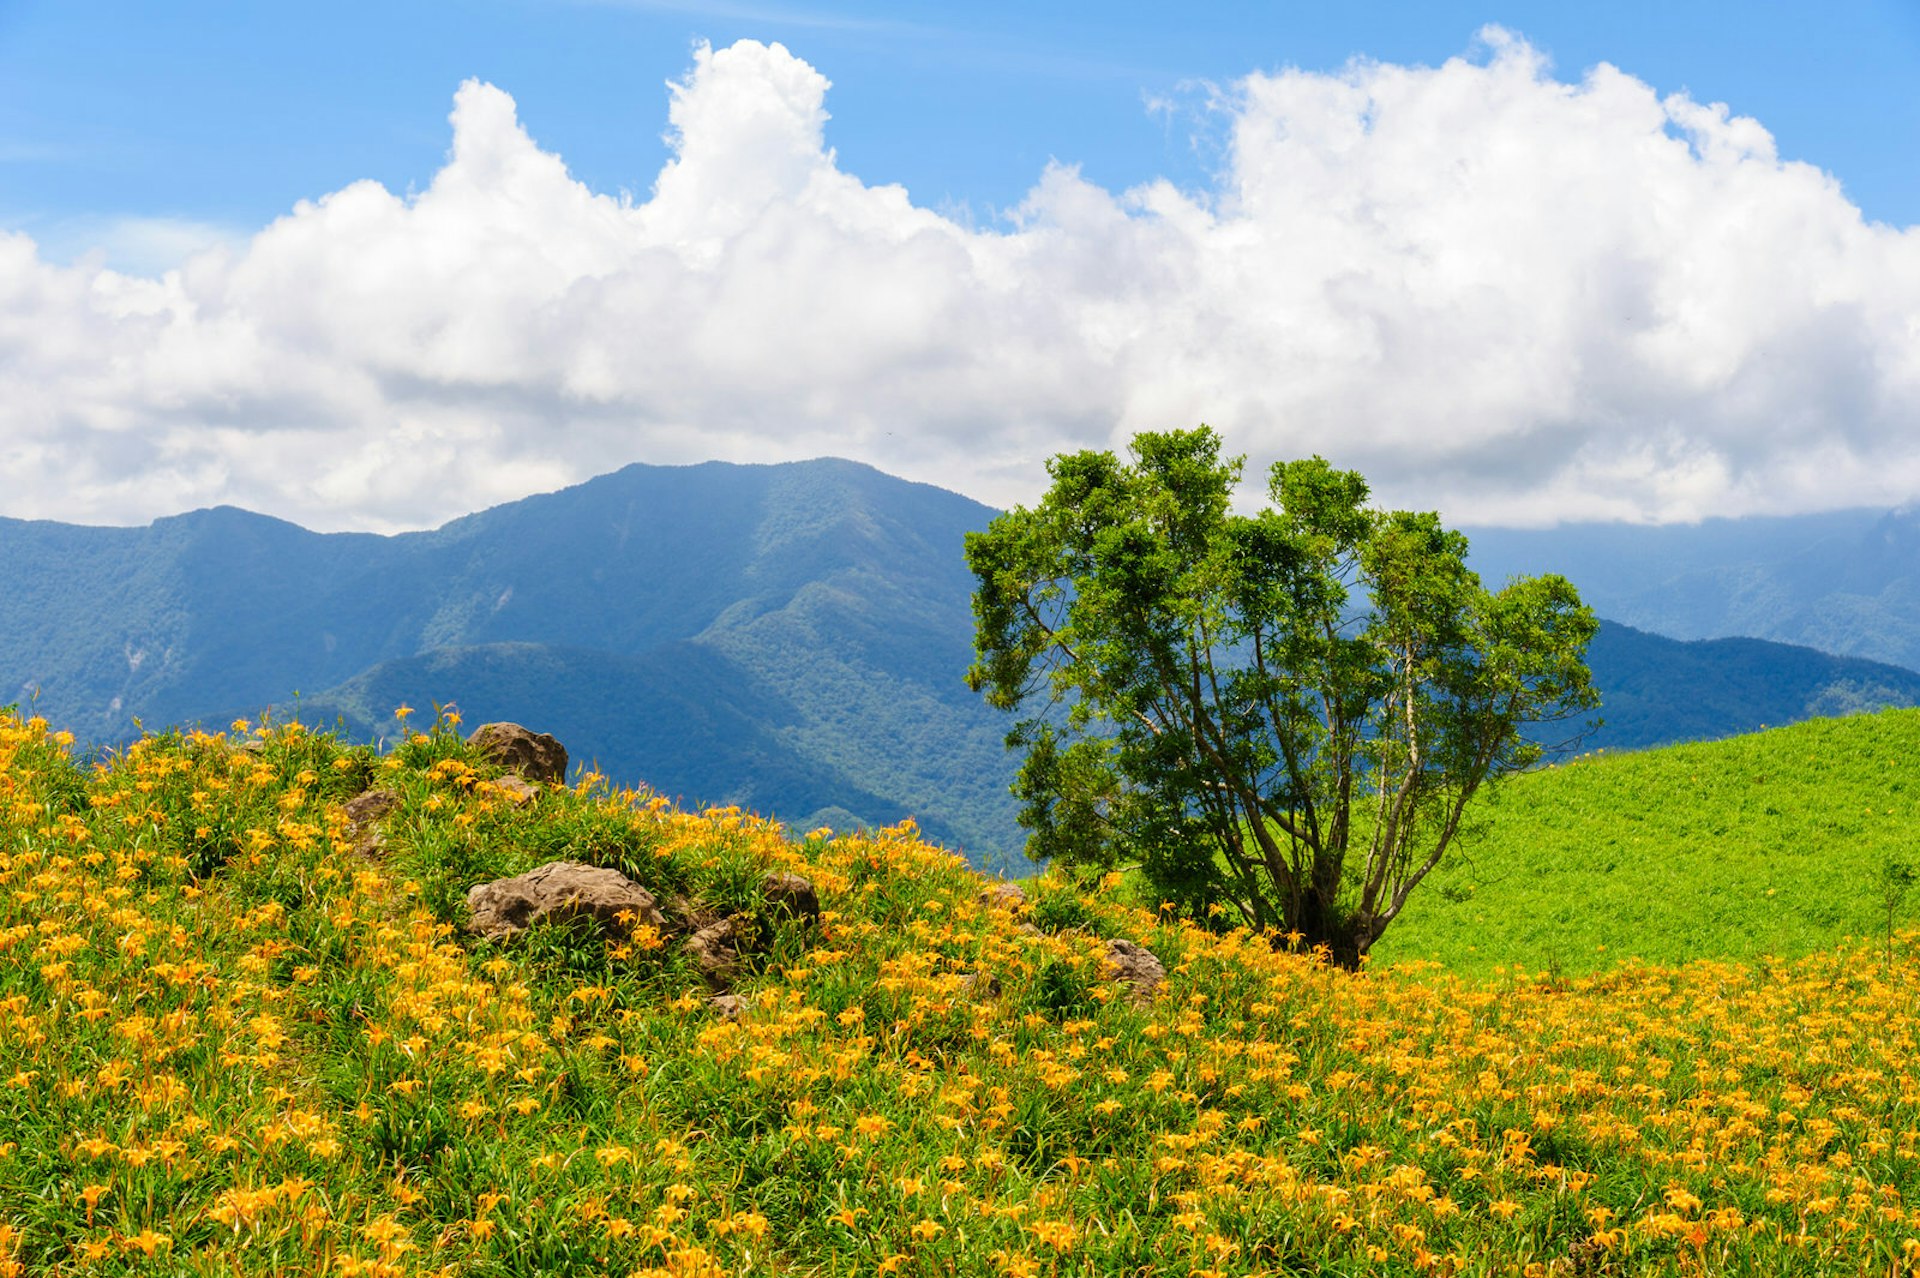 Orange day lilies bloom in autumn south of Taitung © Richie Chan / Shutterstock